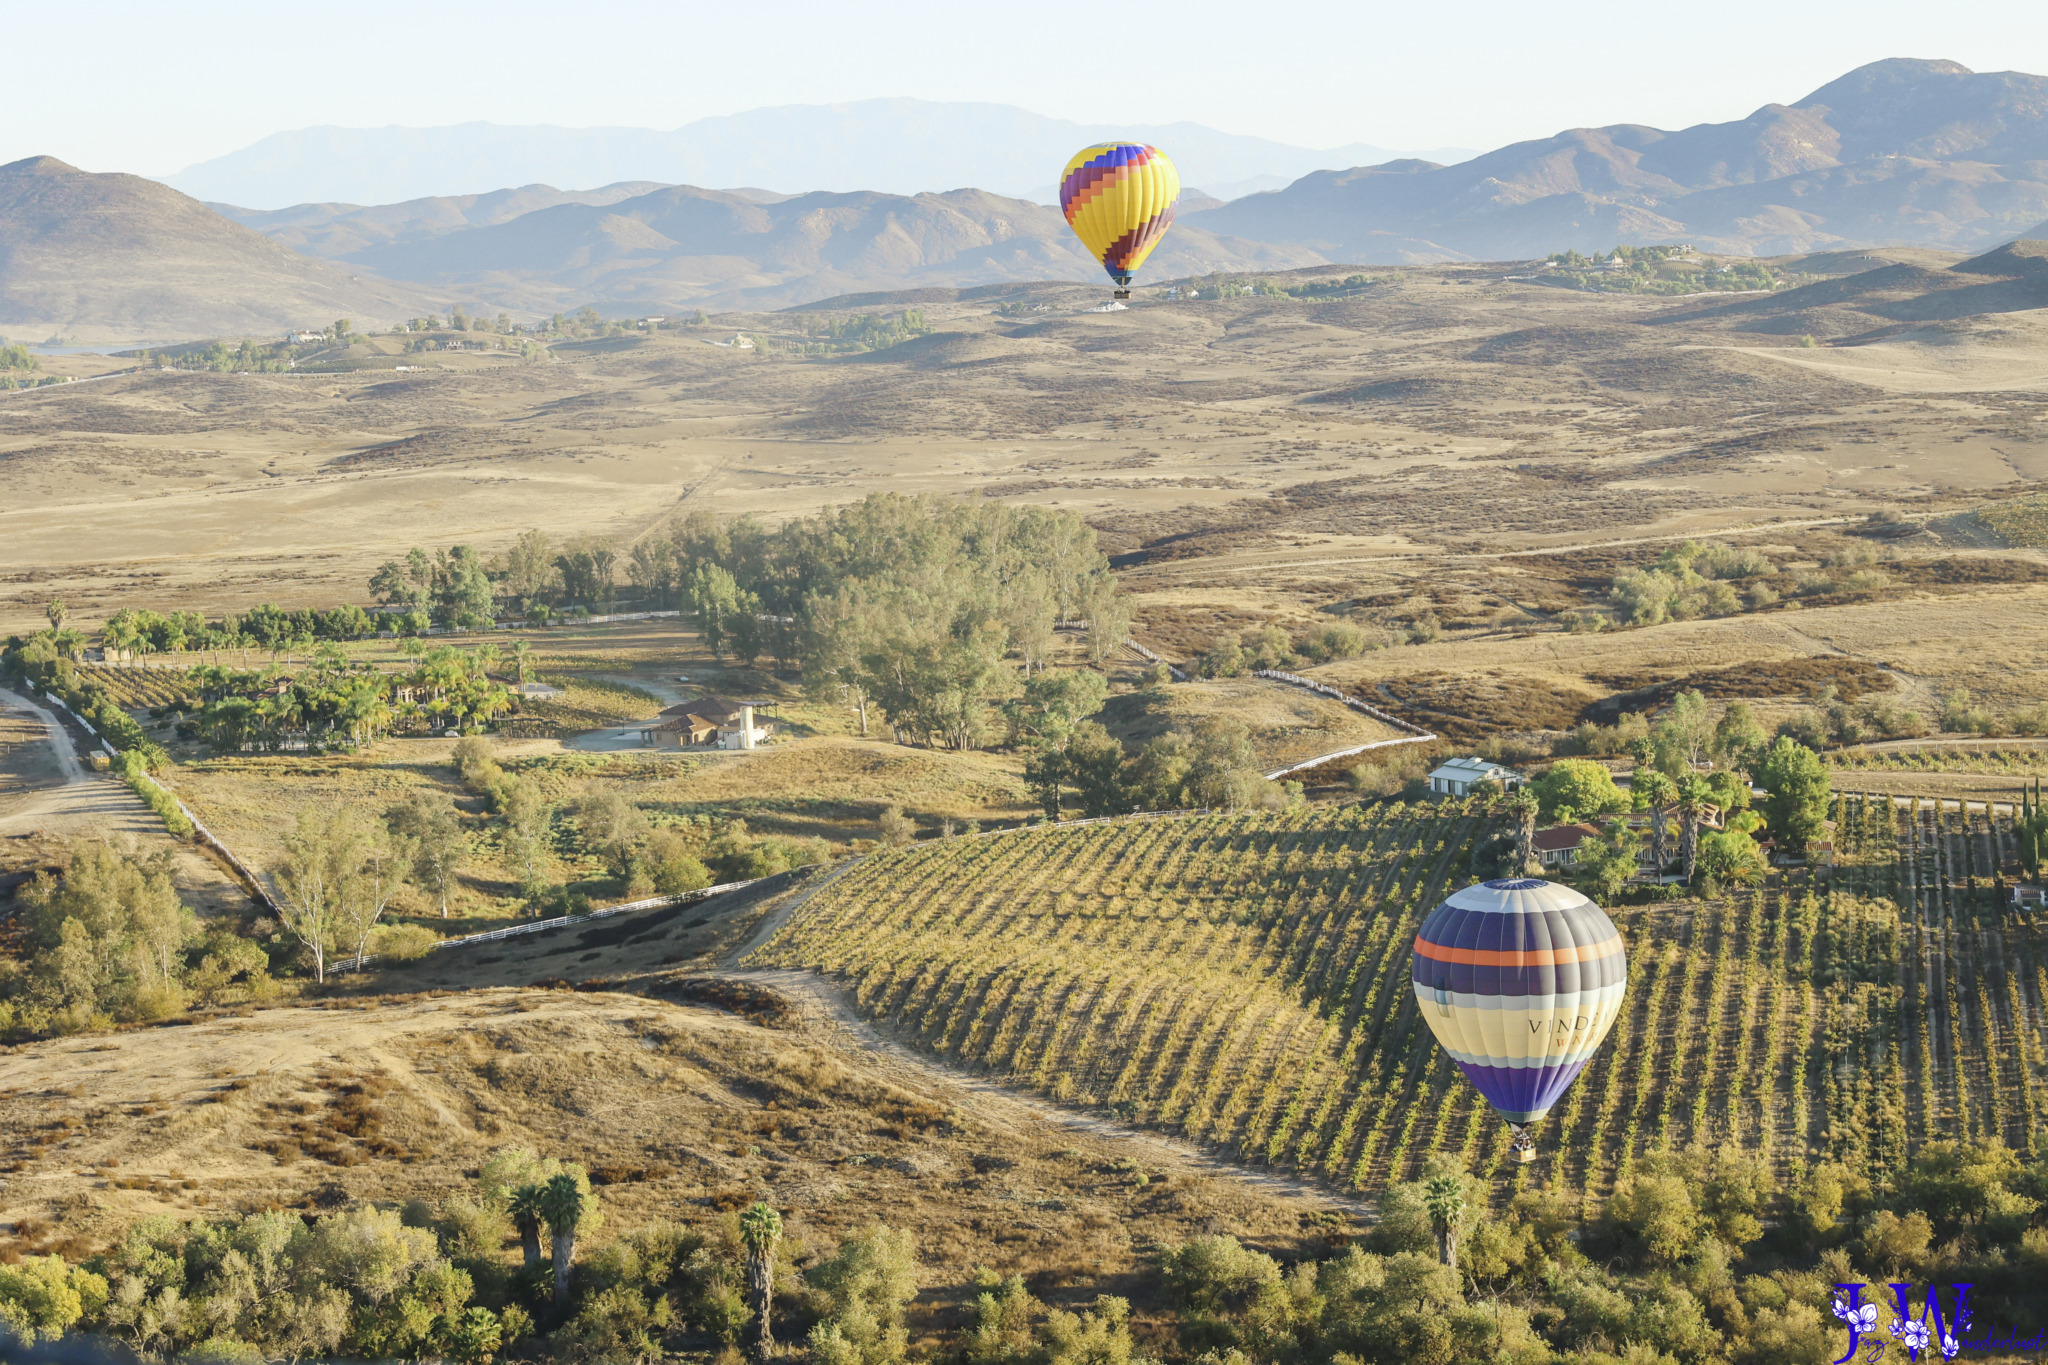 Overlooking Temecula Valley from hot air balloon. Photography by Jaz Wanderlust.